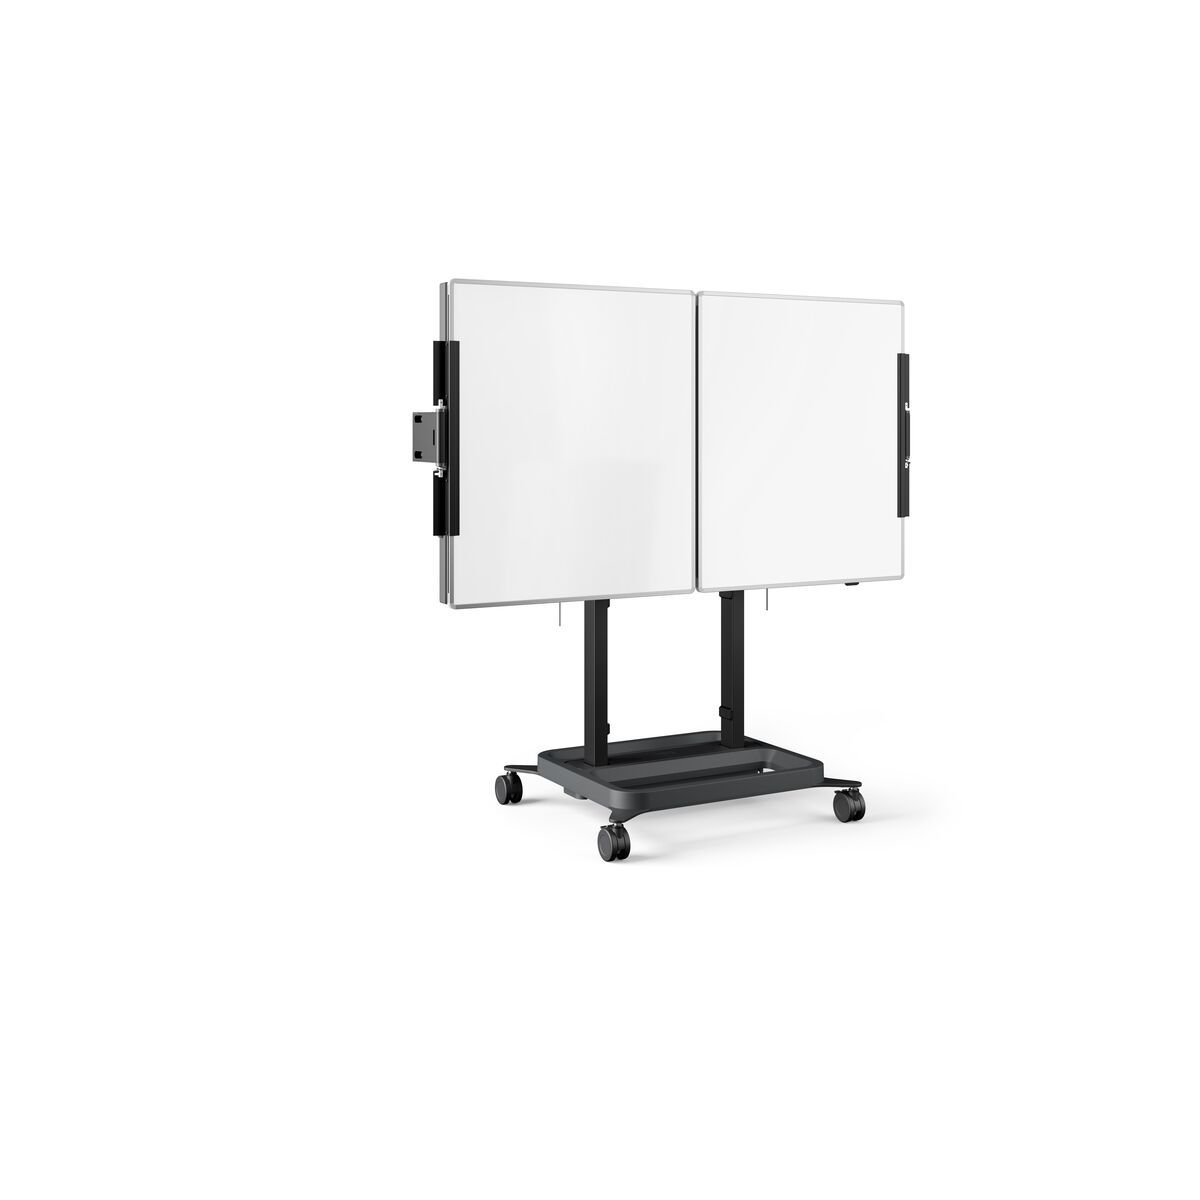 VOGELS RISE A227 - Whiteboard set 75 inch for motorised RISE stands and trolleys